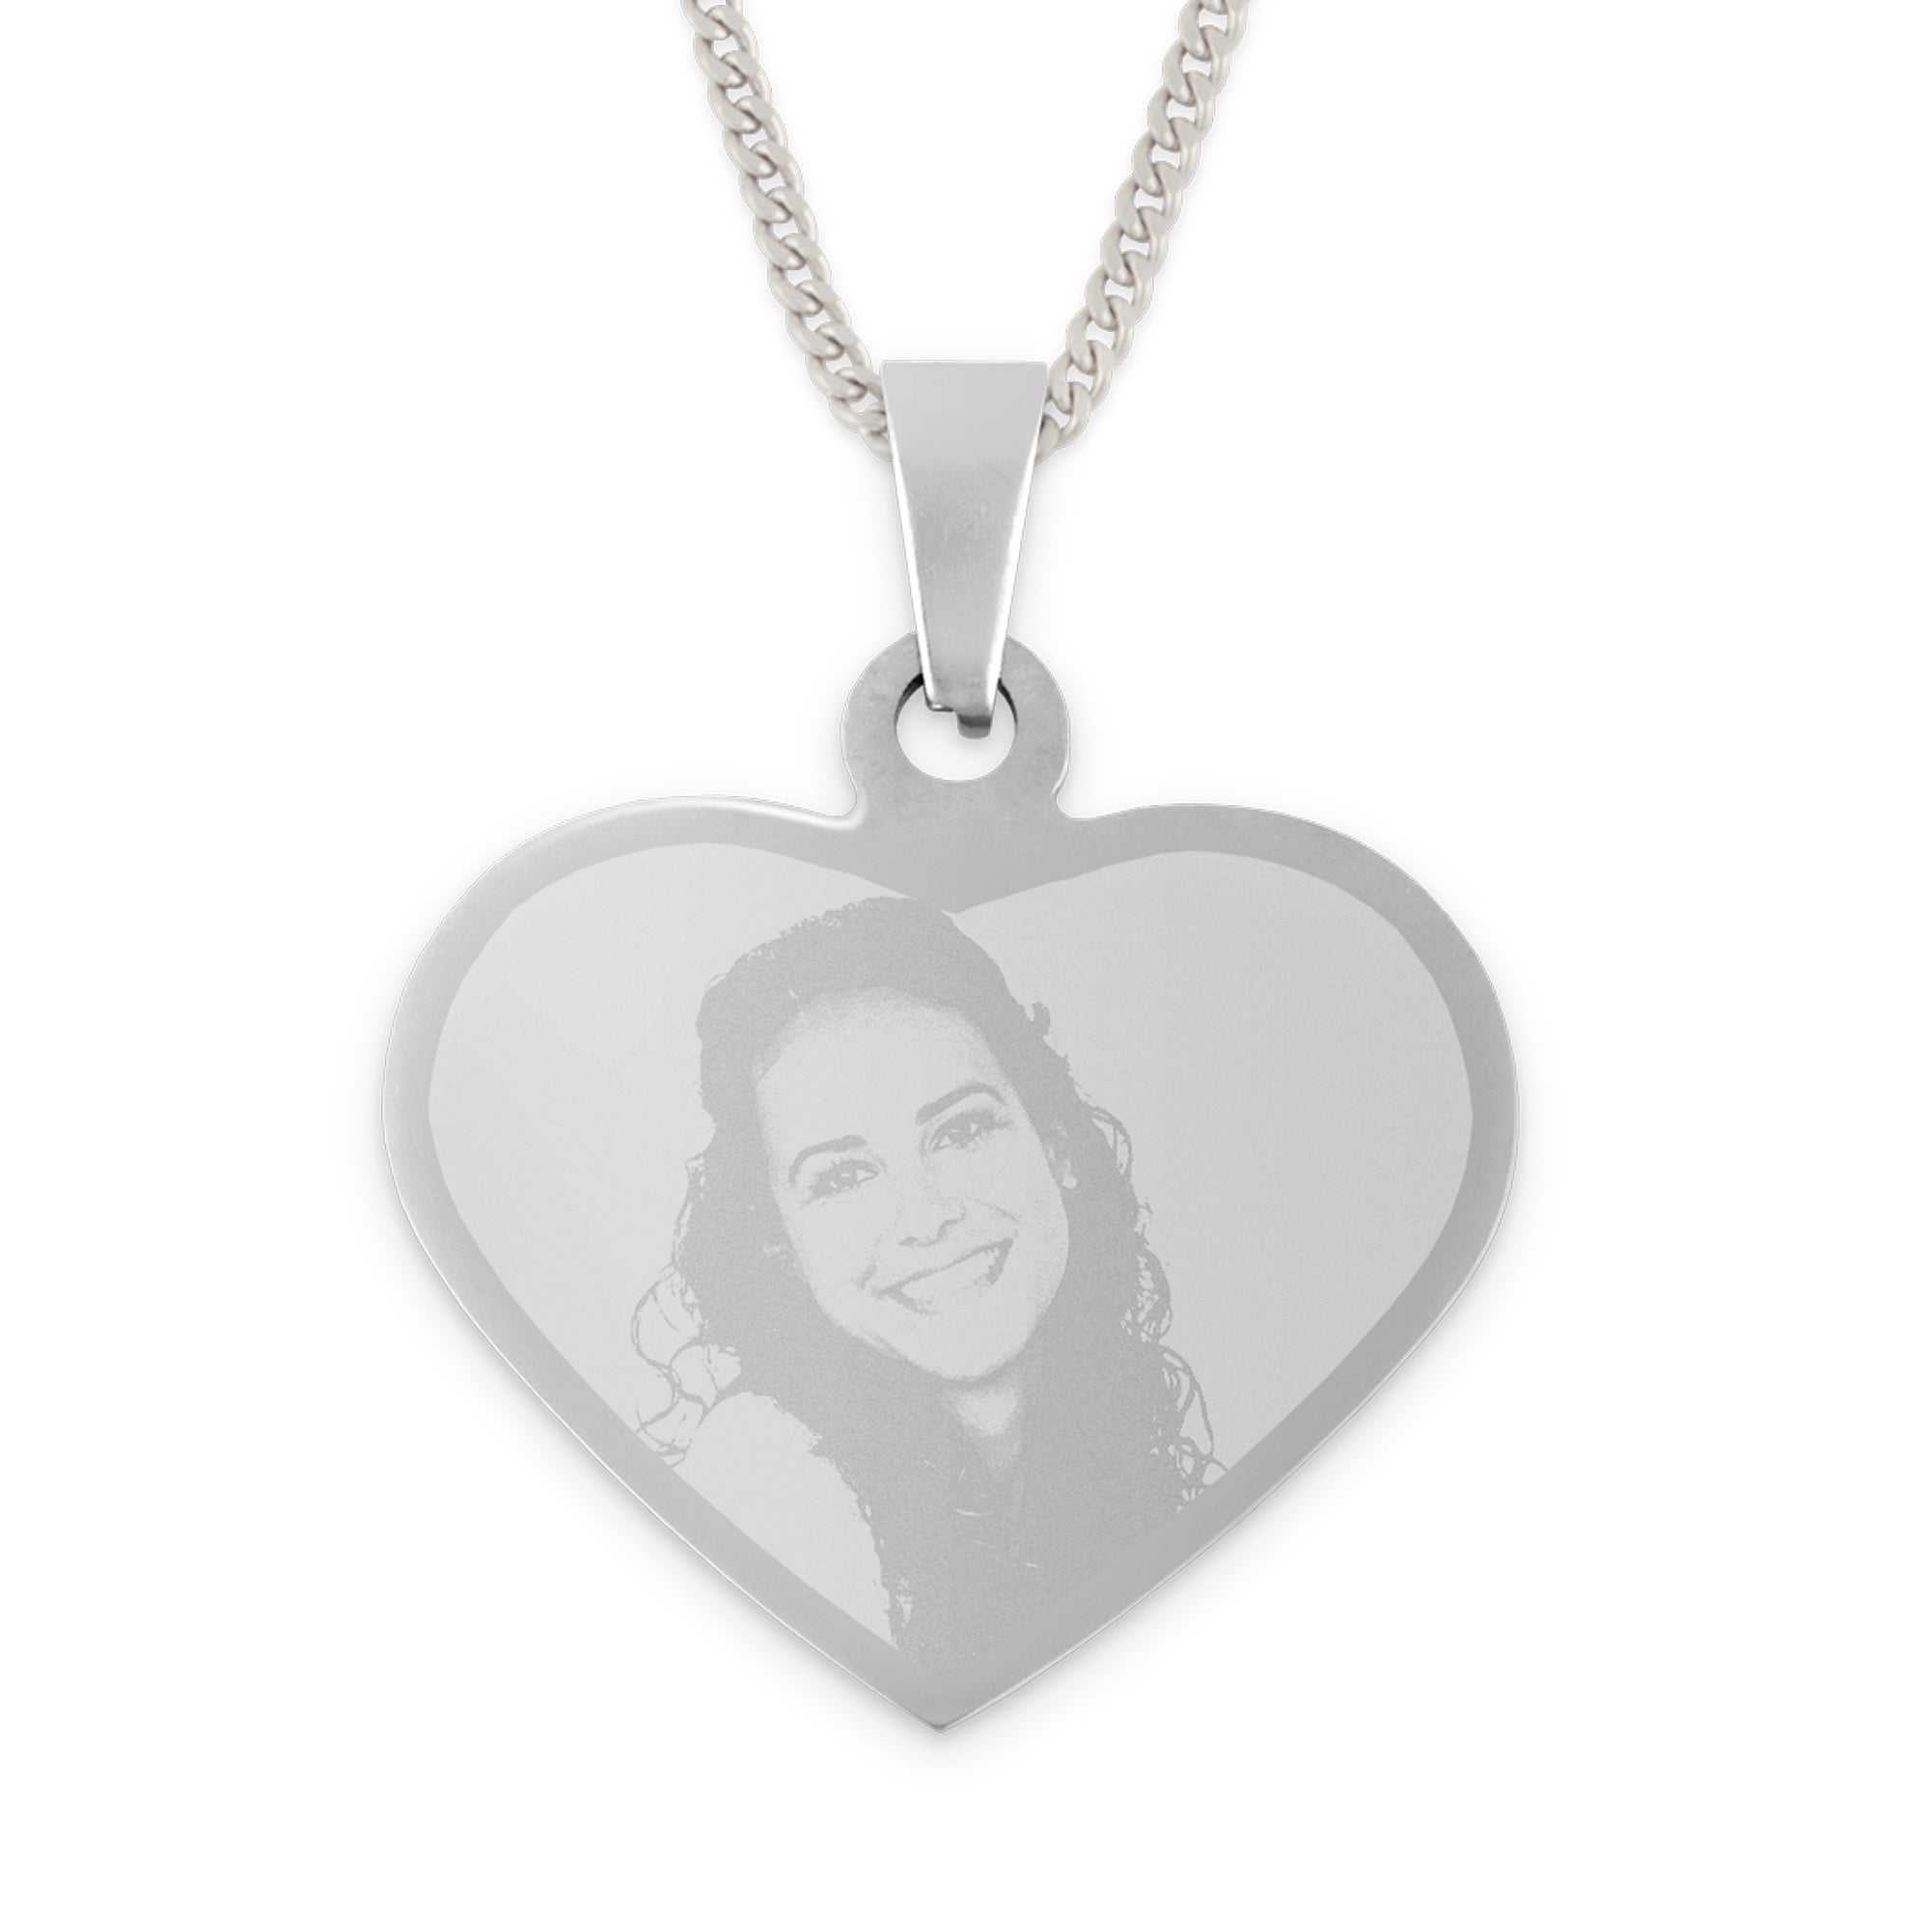 Heart necklace with photo - Silver